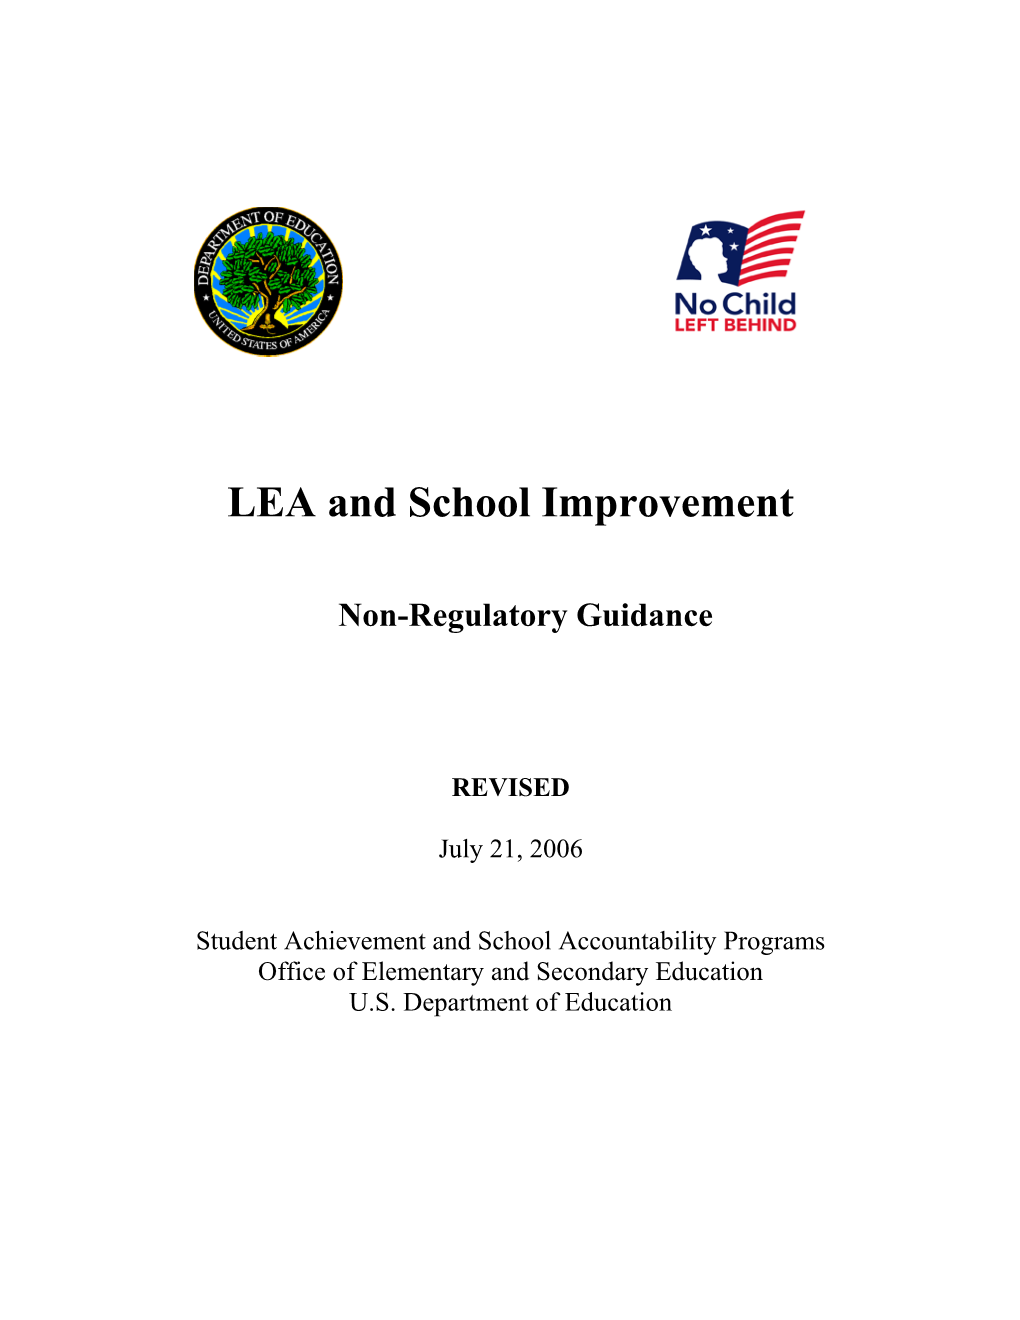 LEA and School Improvement Guidance, July 21, 2006 (MS Word)